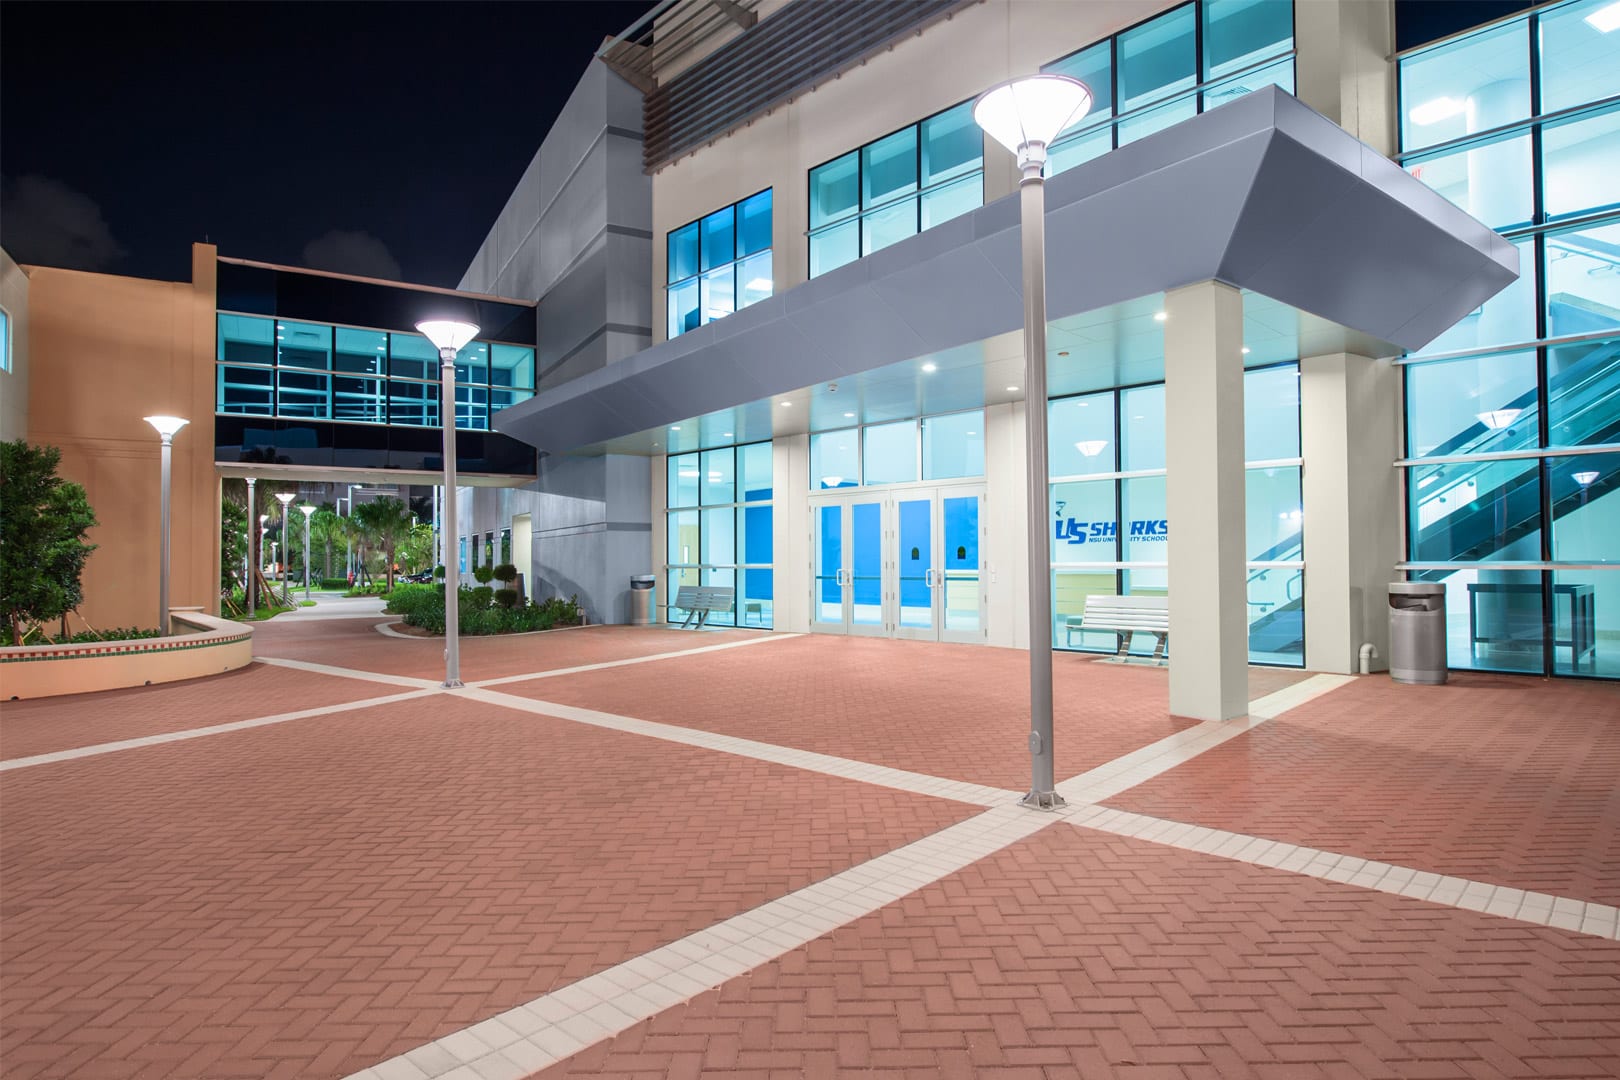 IU C&I Studio Portfolio Grycon Nova Southeastern University View from outside of lobby of NSU University School by front doors with red bricked patio stones and lighting.